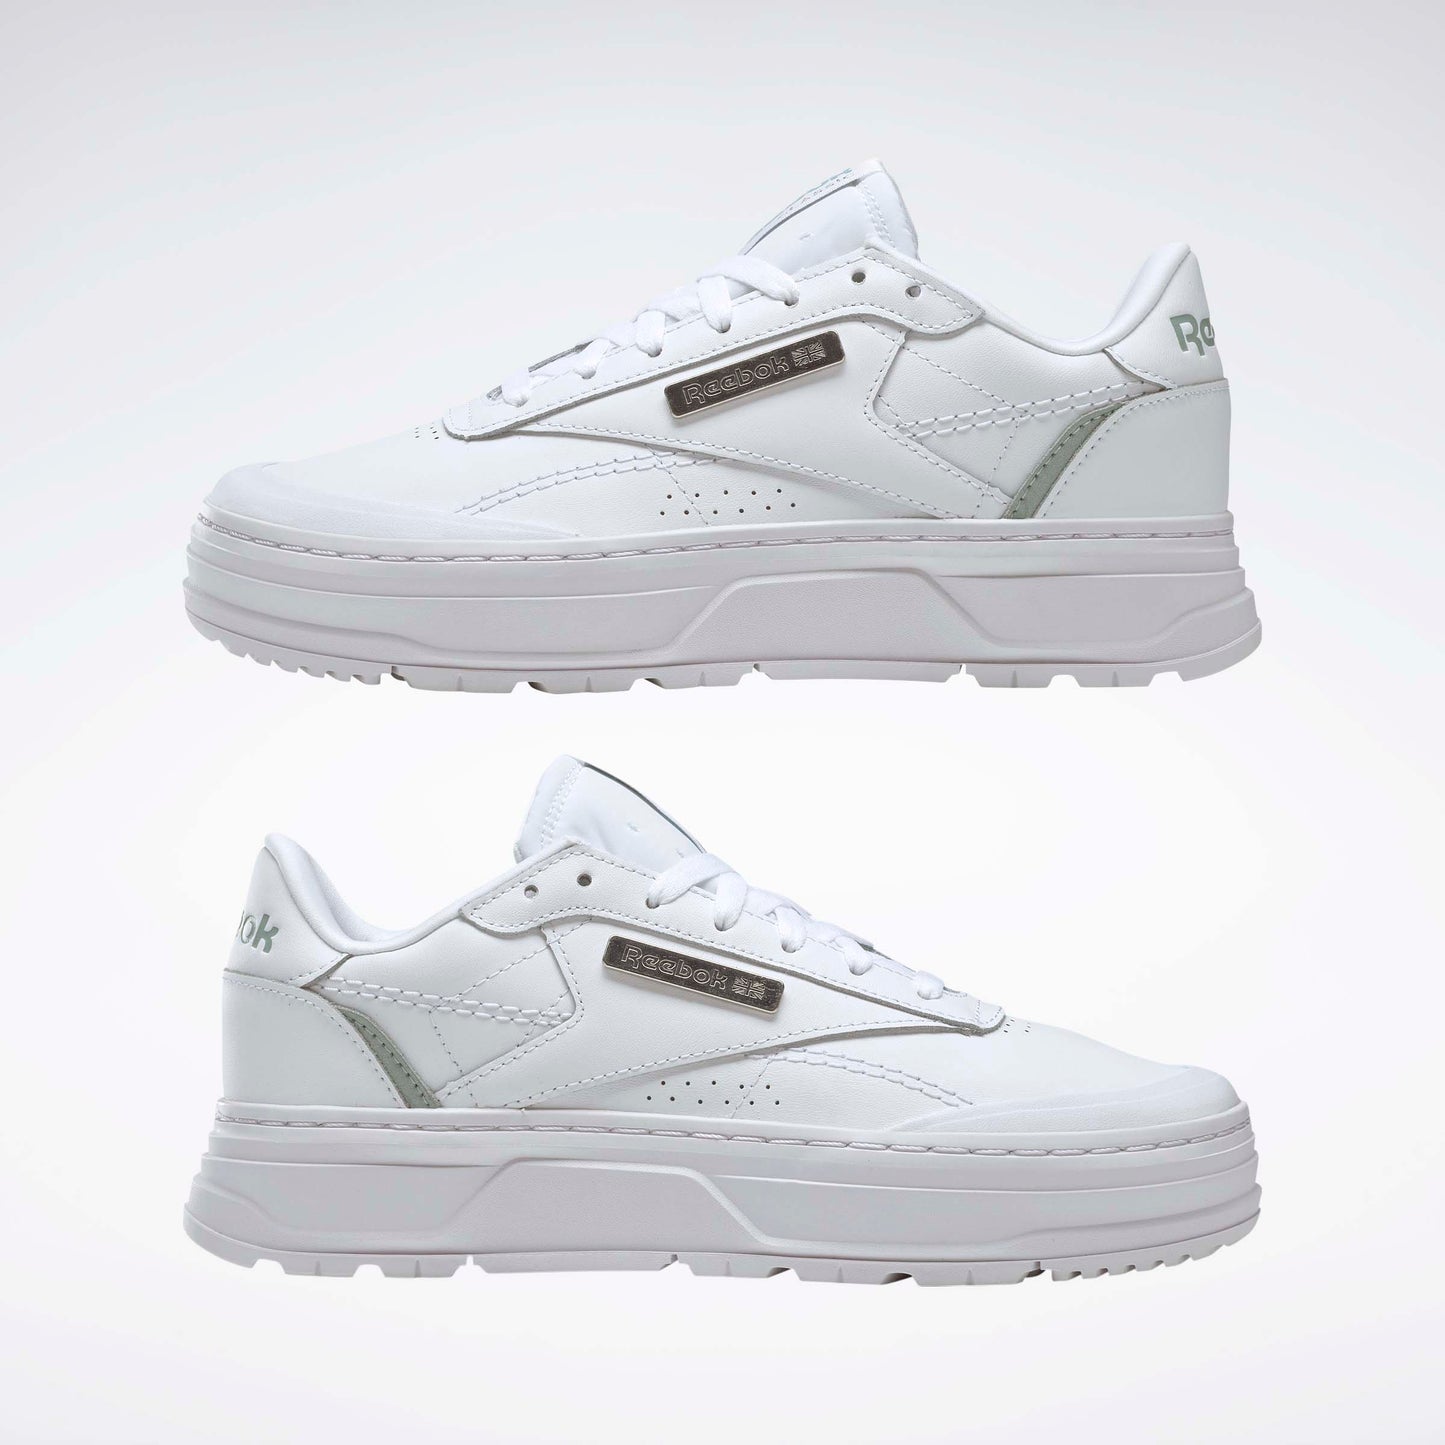 Club C Double Geo Shoes White/Seaside Grey/Silver